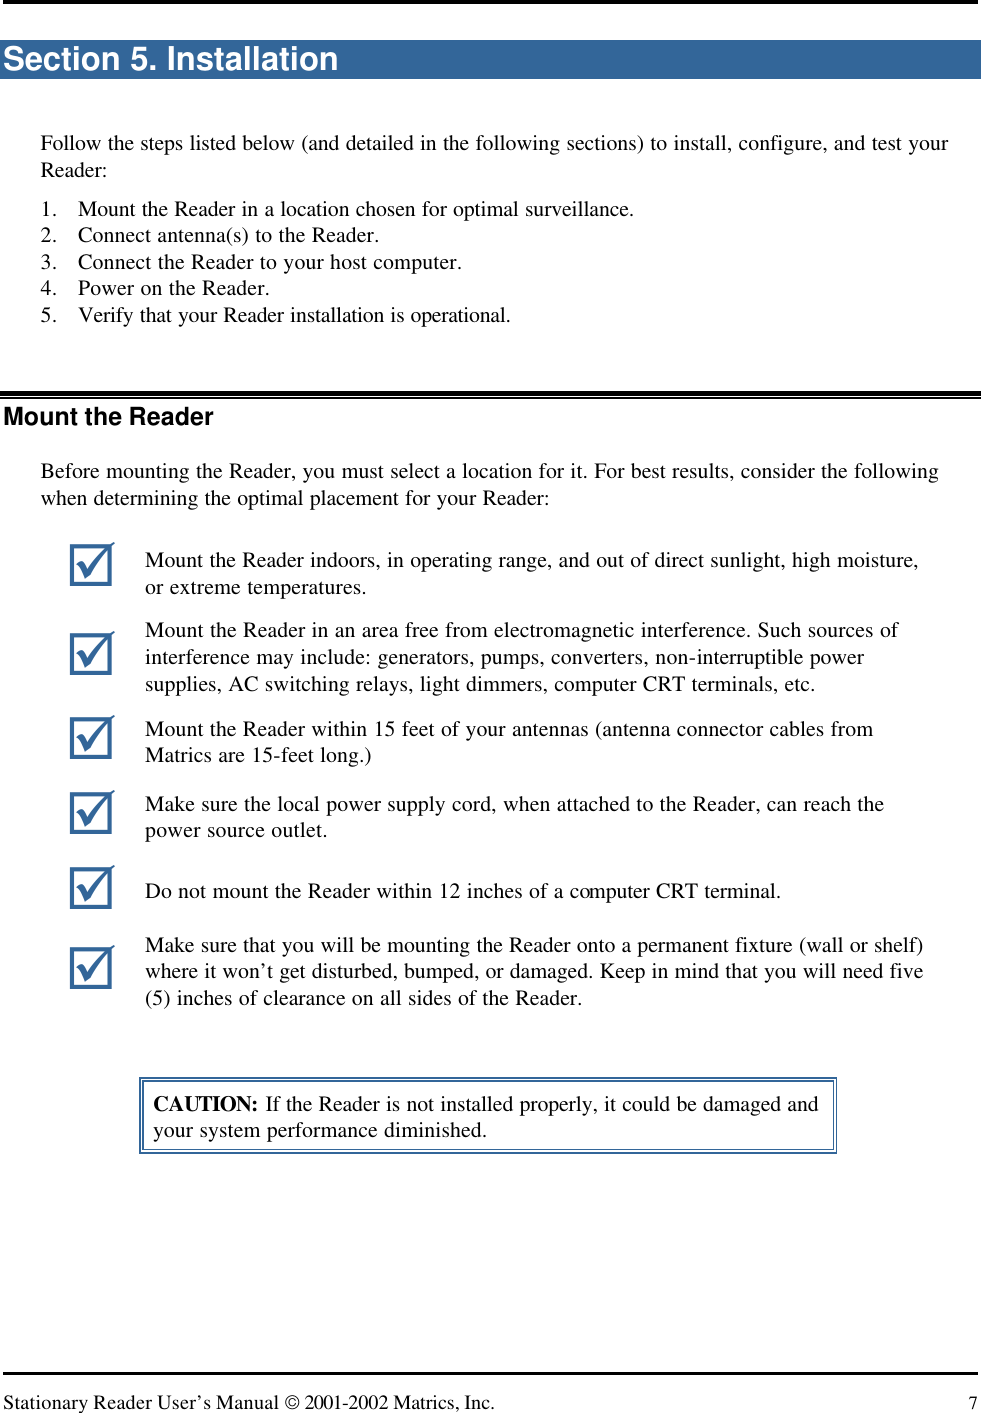   Stationary Reader User’s Manual  2001-2002 Matrics, Inc. 7 Section 5. Installation Follow the steps listed below (and detailed in the following sections) to install, configure, and test your Reader: 1. Mount the Reader in a location chosen for optimal surveillance. 2. Connect antenna(s) to the Reader. 3. Connect the Reader to your host computer. 4. Power on the Reader. 5. Verify that your Reader installation is operational.  Mount the Reader Before mounting the Reader, you must select a location for it. For best results, consider the following when determining the optimal placement for your Reader:  CAUTION: If the Reader is not installed properly, it could be damaged and your system performance diminished. þ  Mount the Reader indoors, in operating range, and out of direct sunlight, high moisture, or extreme temperatures. þ Mount the Reader in an area free from electromagnetic interference. Such sources of interference may include: generators, pumps, converters, non-interruptible power supplies, AC switching relays, light dimmers, computer CRT terminals, etc. þ Mount the Reader within 15 feet of your antennas (antenna connector cables from Matrics are 15-feet long.) þ Make sure the local power supply cord, when attached to the Reader, can reach the power source outlet. þ Do not mount the Reader within 12 inches of a computer CRT terminal. þ Make sure that you will be mounting the Reader onto a permanent fixture (wall or shelf) where it won’t get disturbed, bumped, or damaged. Keep in mind that you will need five (5) inches of clearance on all sides of the Reader. 